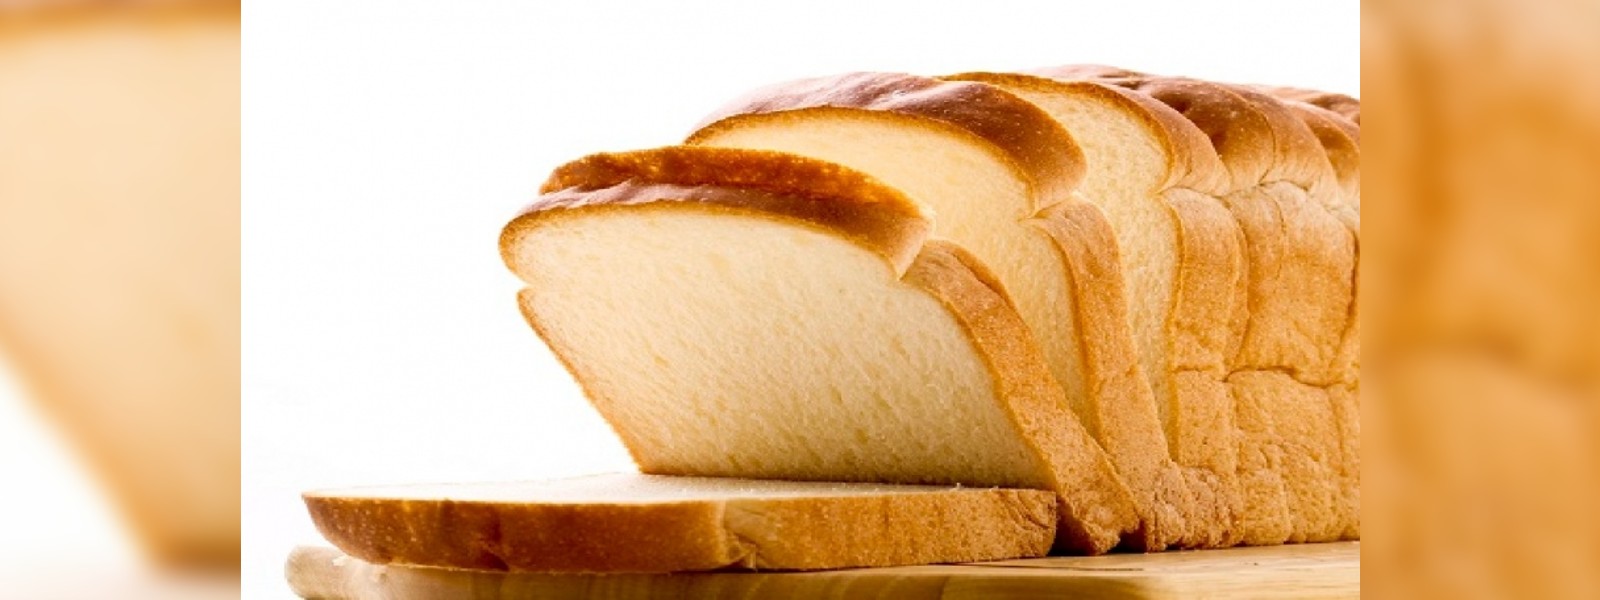 Recording Bread price and weight made mandatory